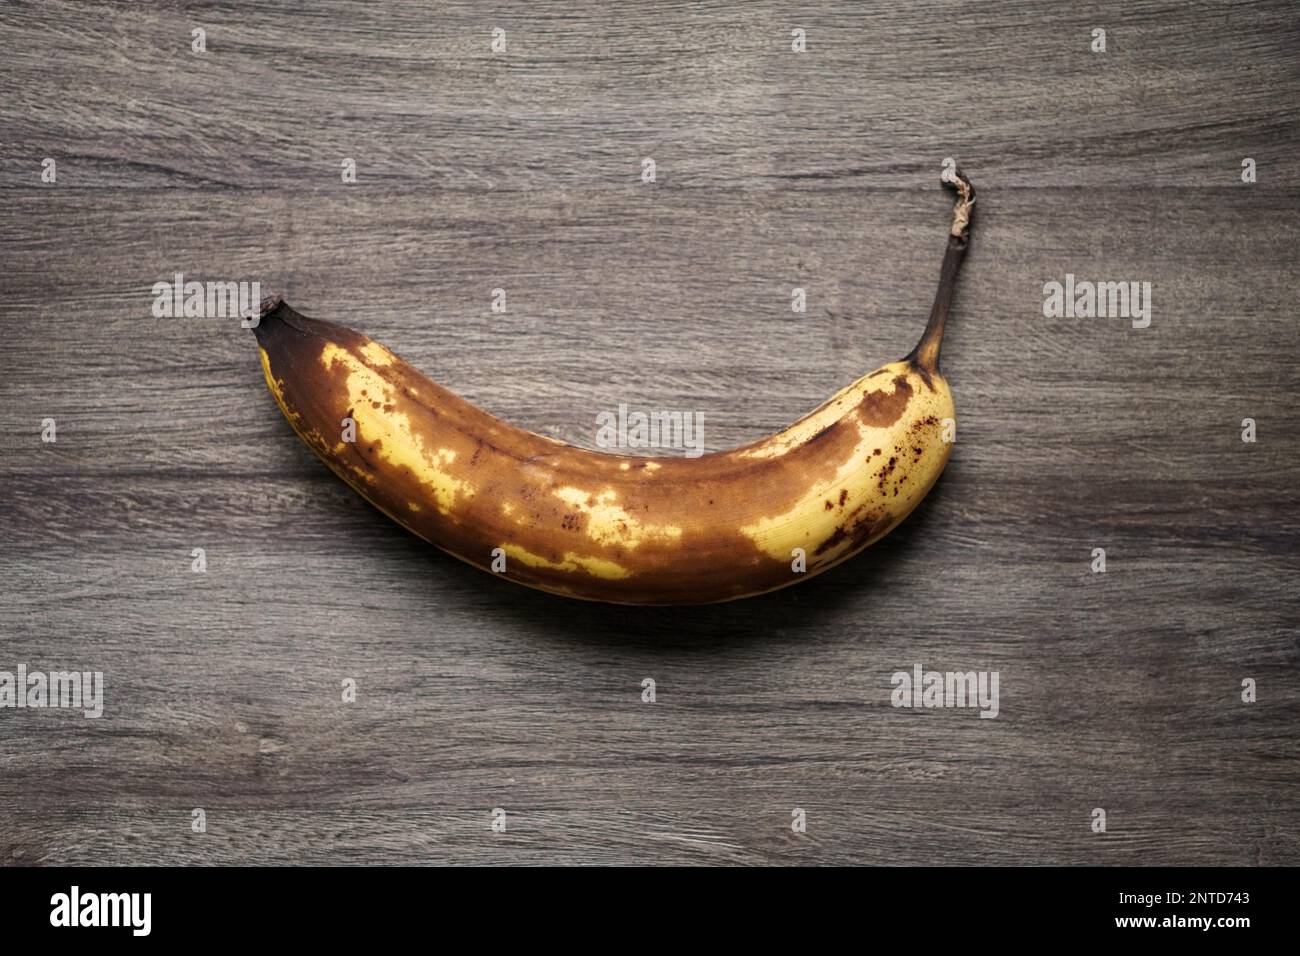 overhead view of overrripe banana fruit with brown skin on rustic wooden background Stock Photo